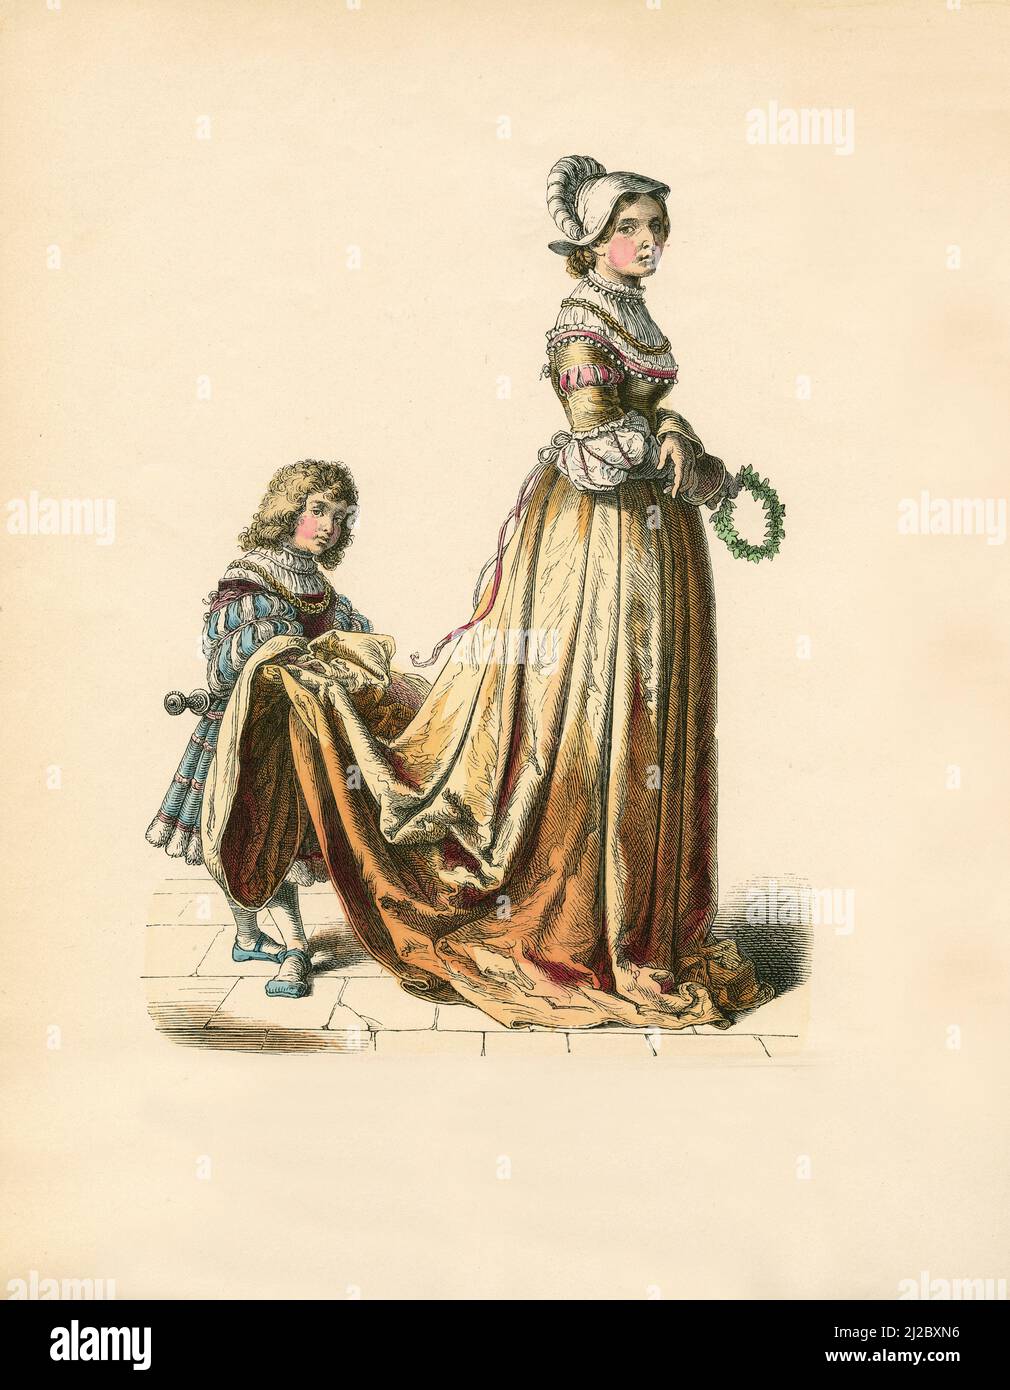 French Noblewoman and Page, First Third of 16th Century, Illustration, The History of Costume, Braun & Schneider, Munich, Germany, 1861-1880 Stock Photo